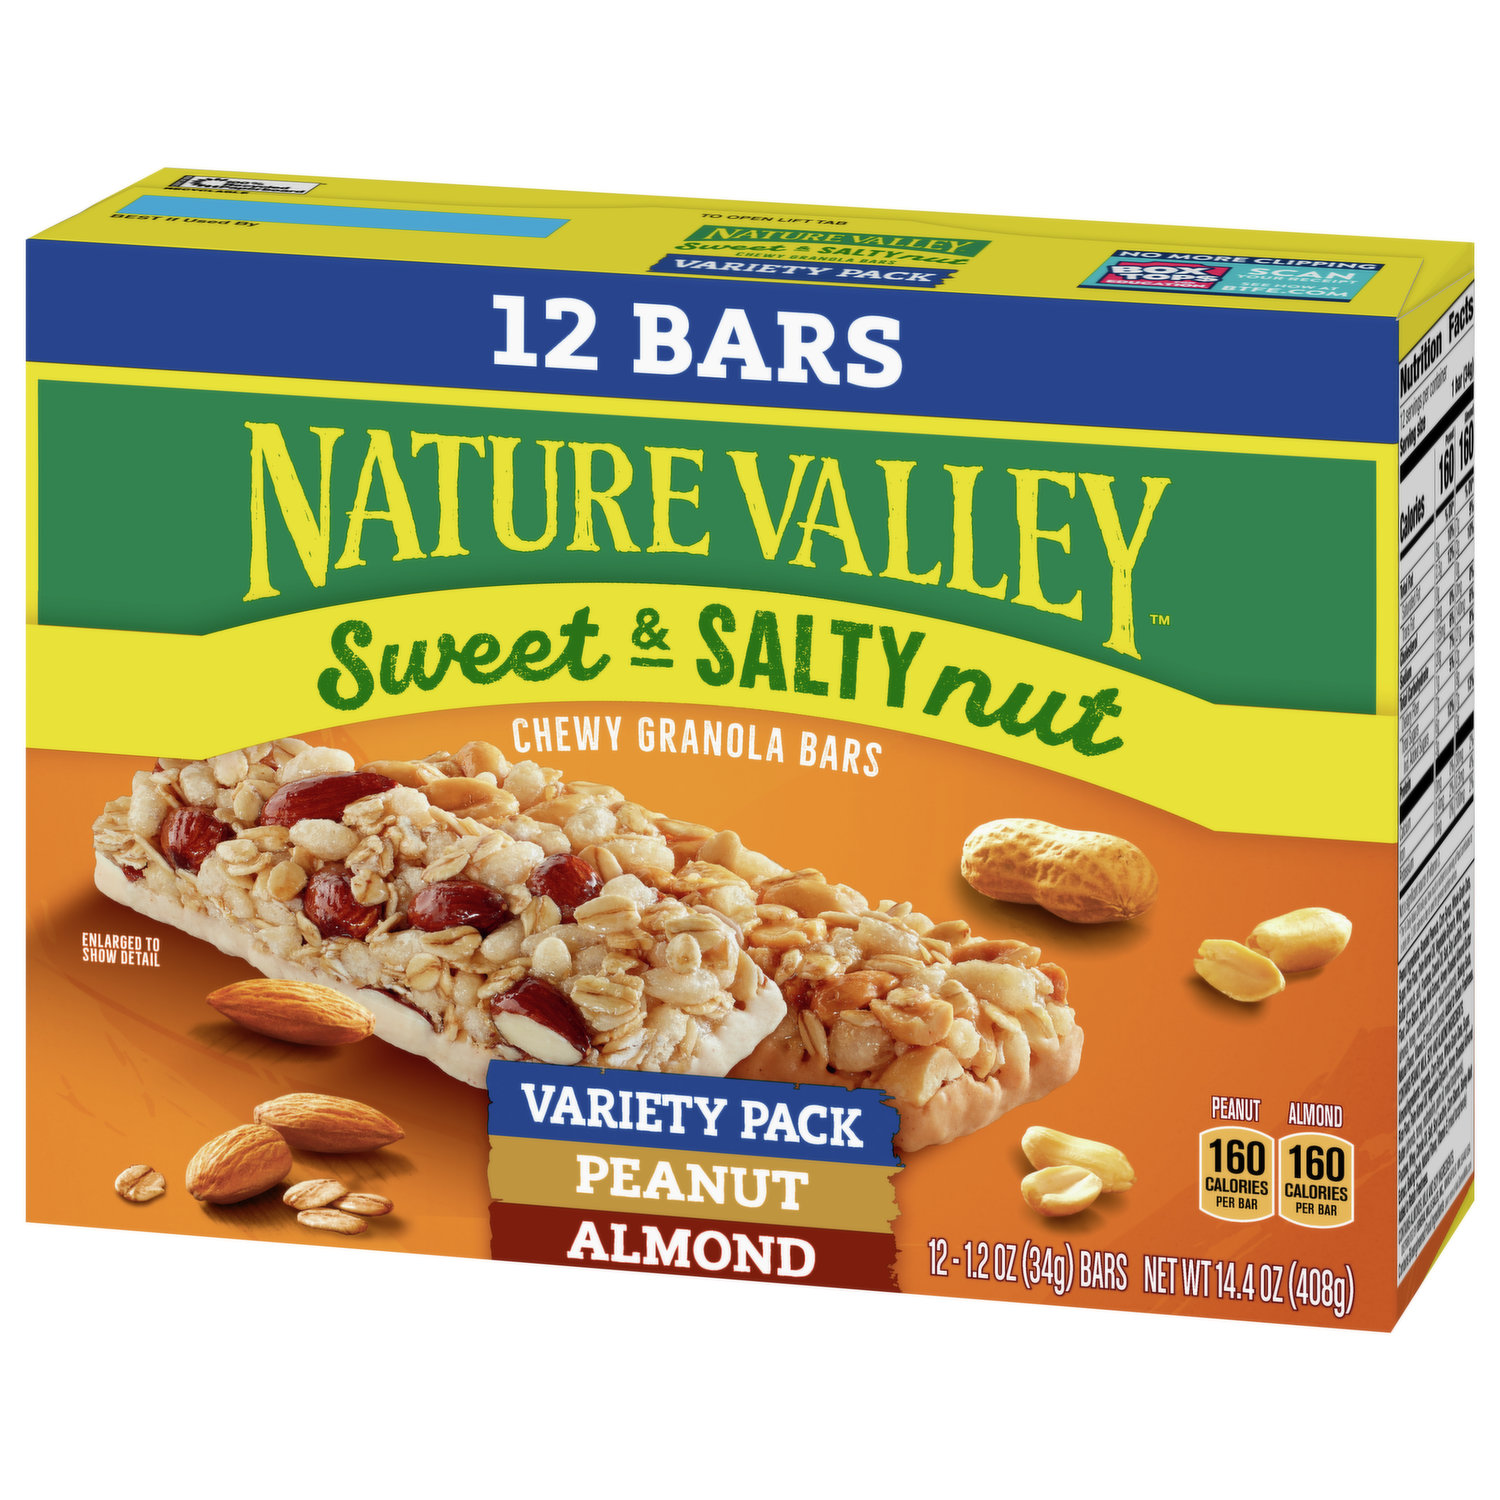 Nature Valley Granola Bars, Chewy, Almond/Dark Chocolate, Peanut & Almond, Peanut, Sweet & Salty Nut, Variety Pack, 15 Pack - 15 pack, 1.2 oz bars